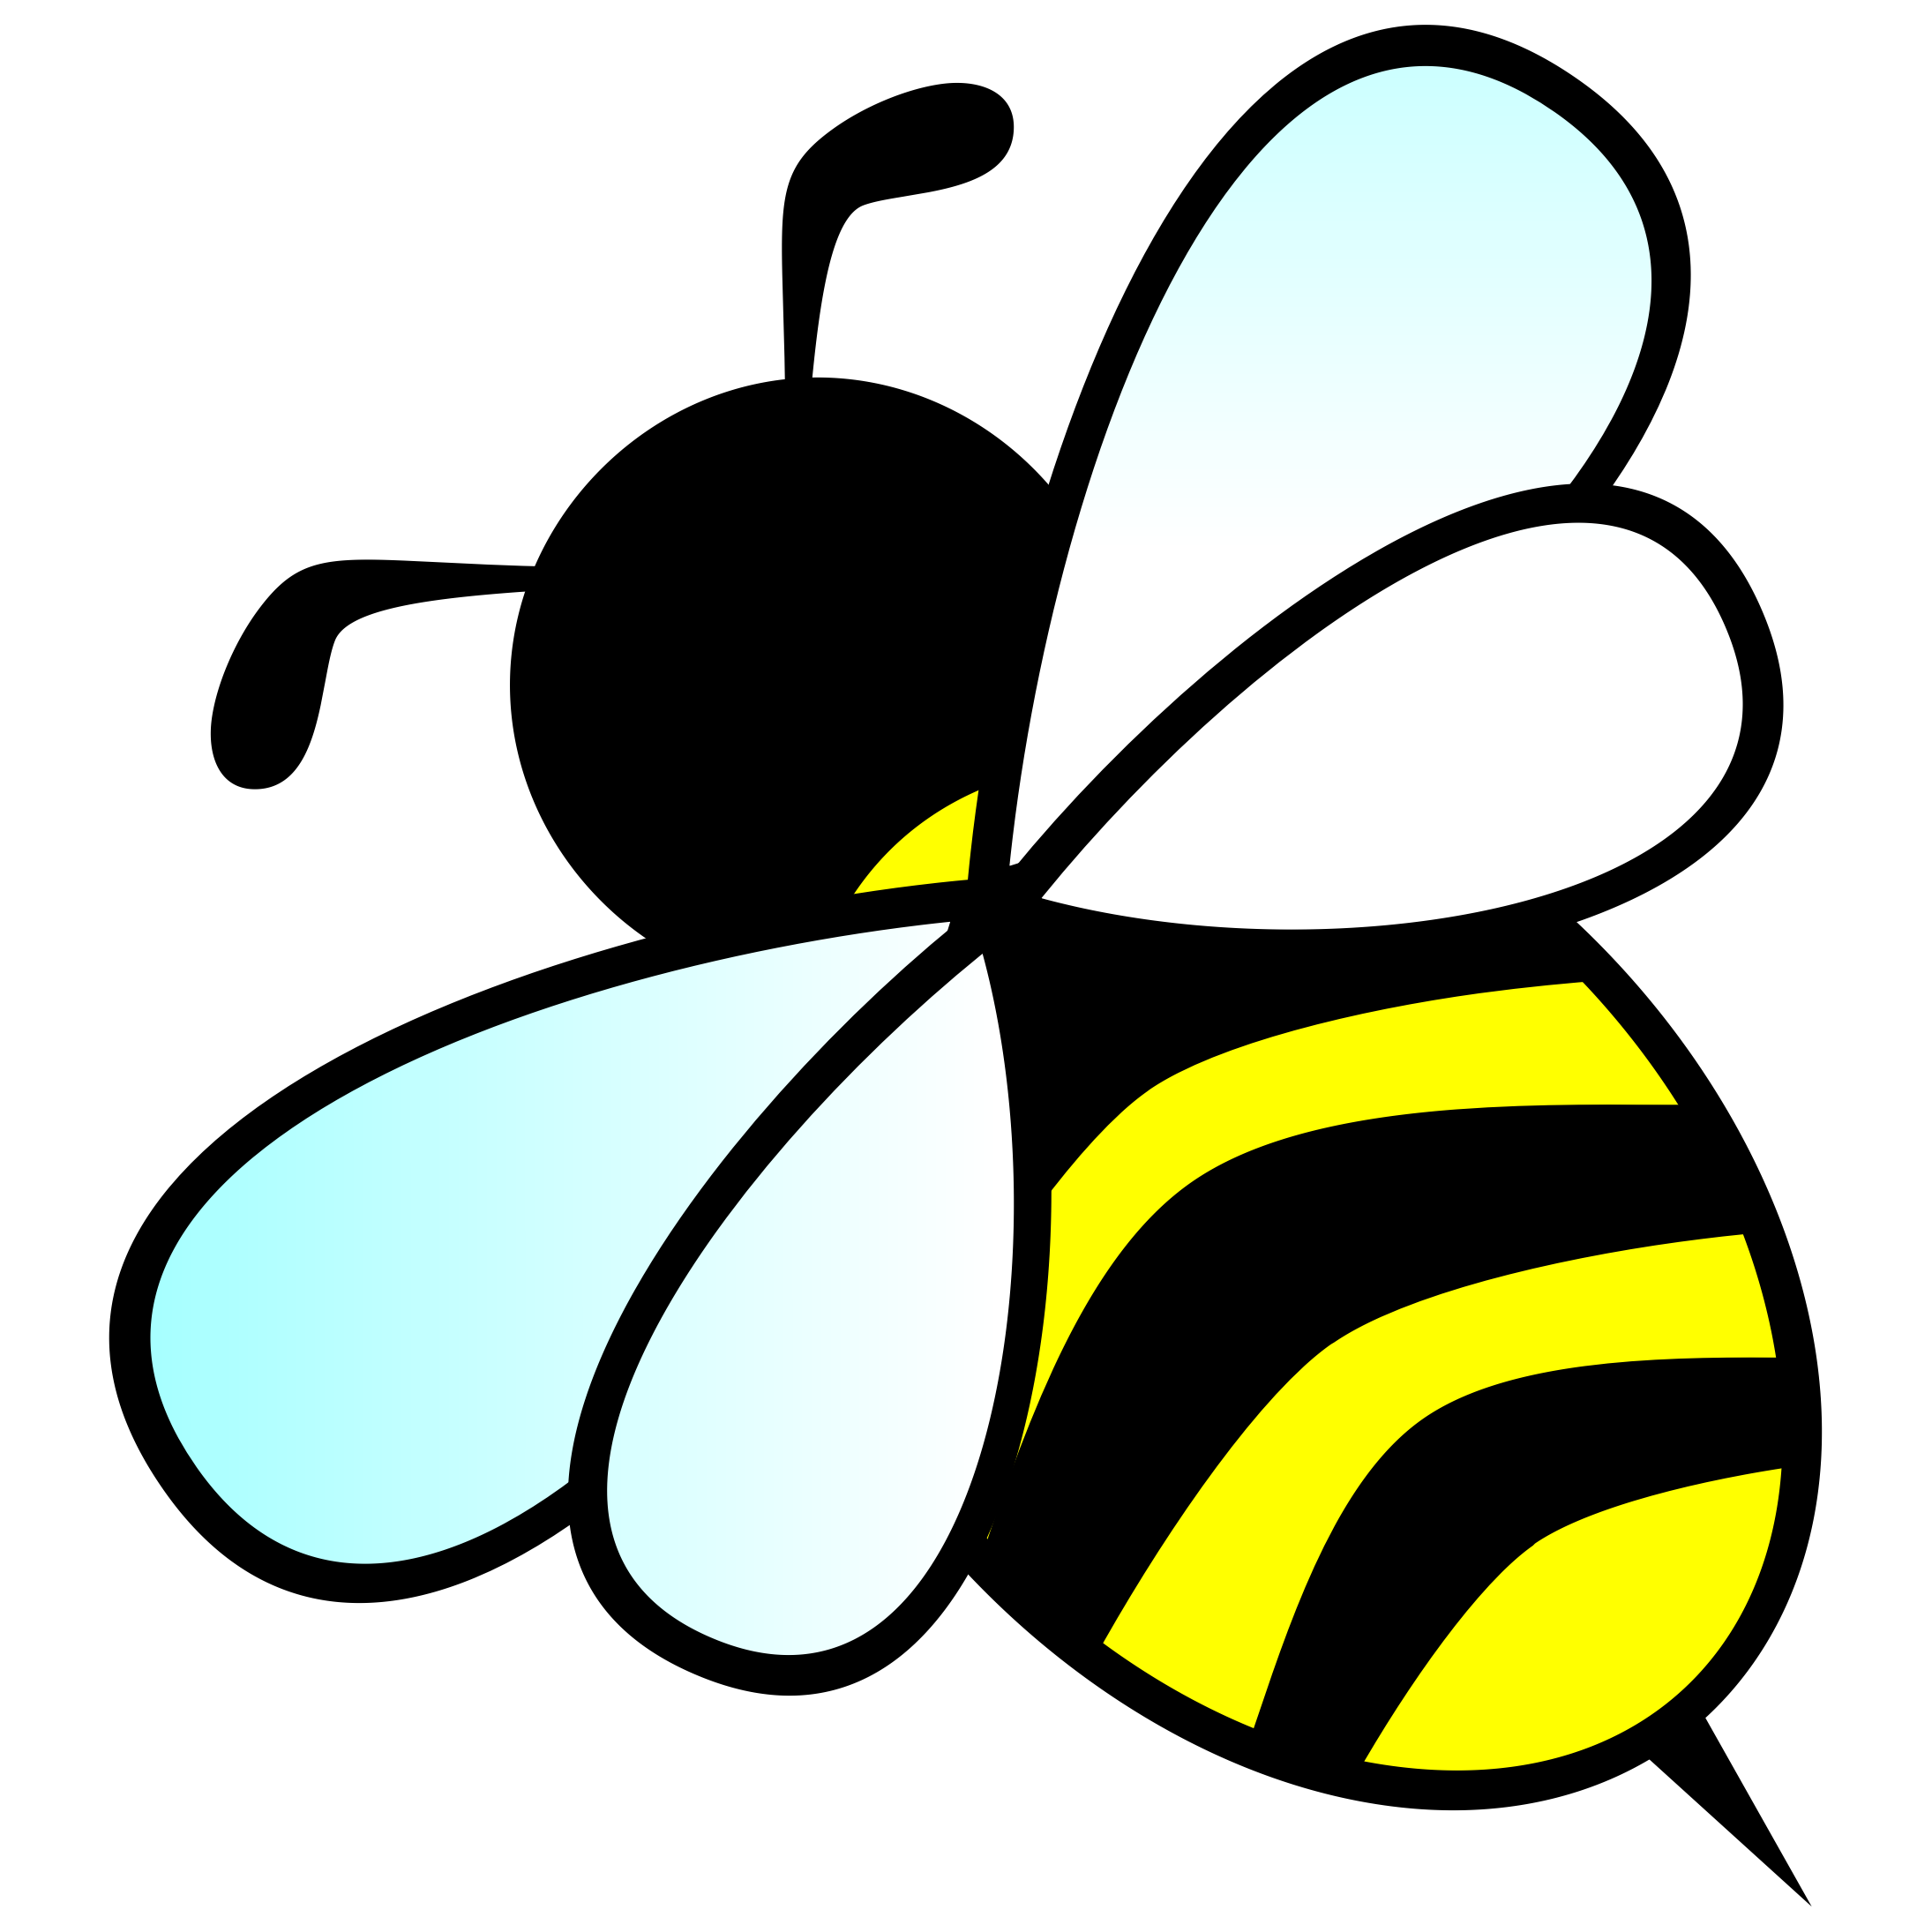 Bee clipart 2 bumble bee clip art free 5 all rights clipartcow 3